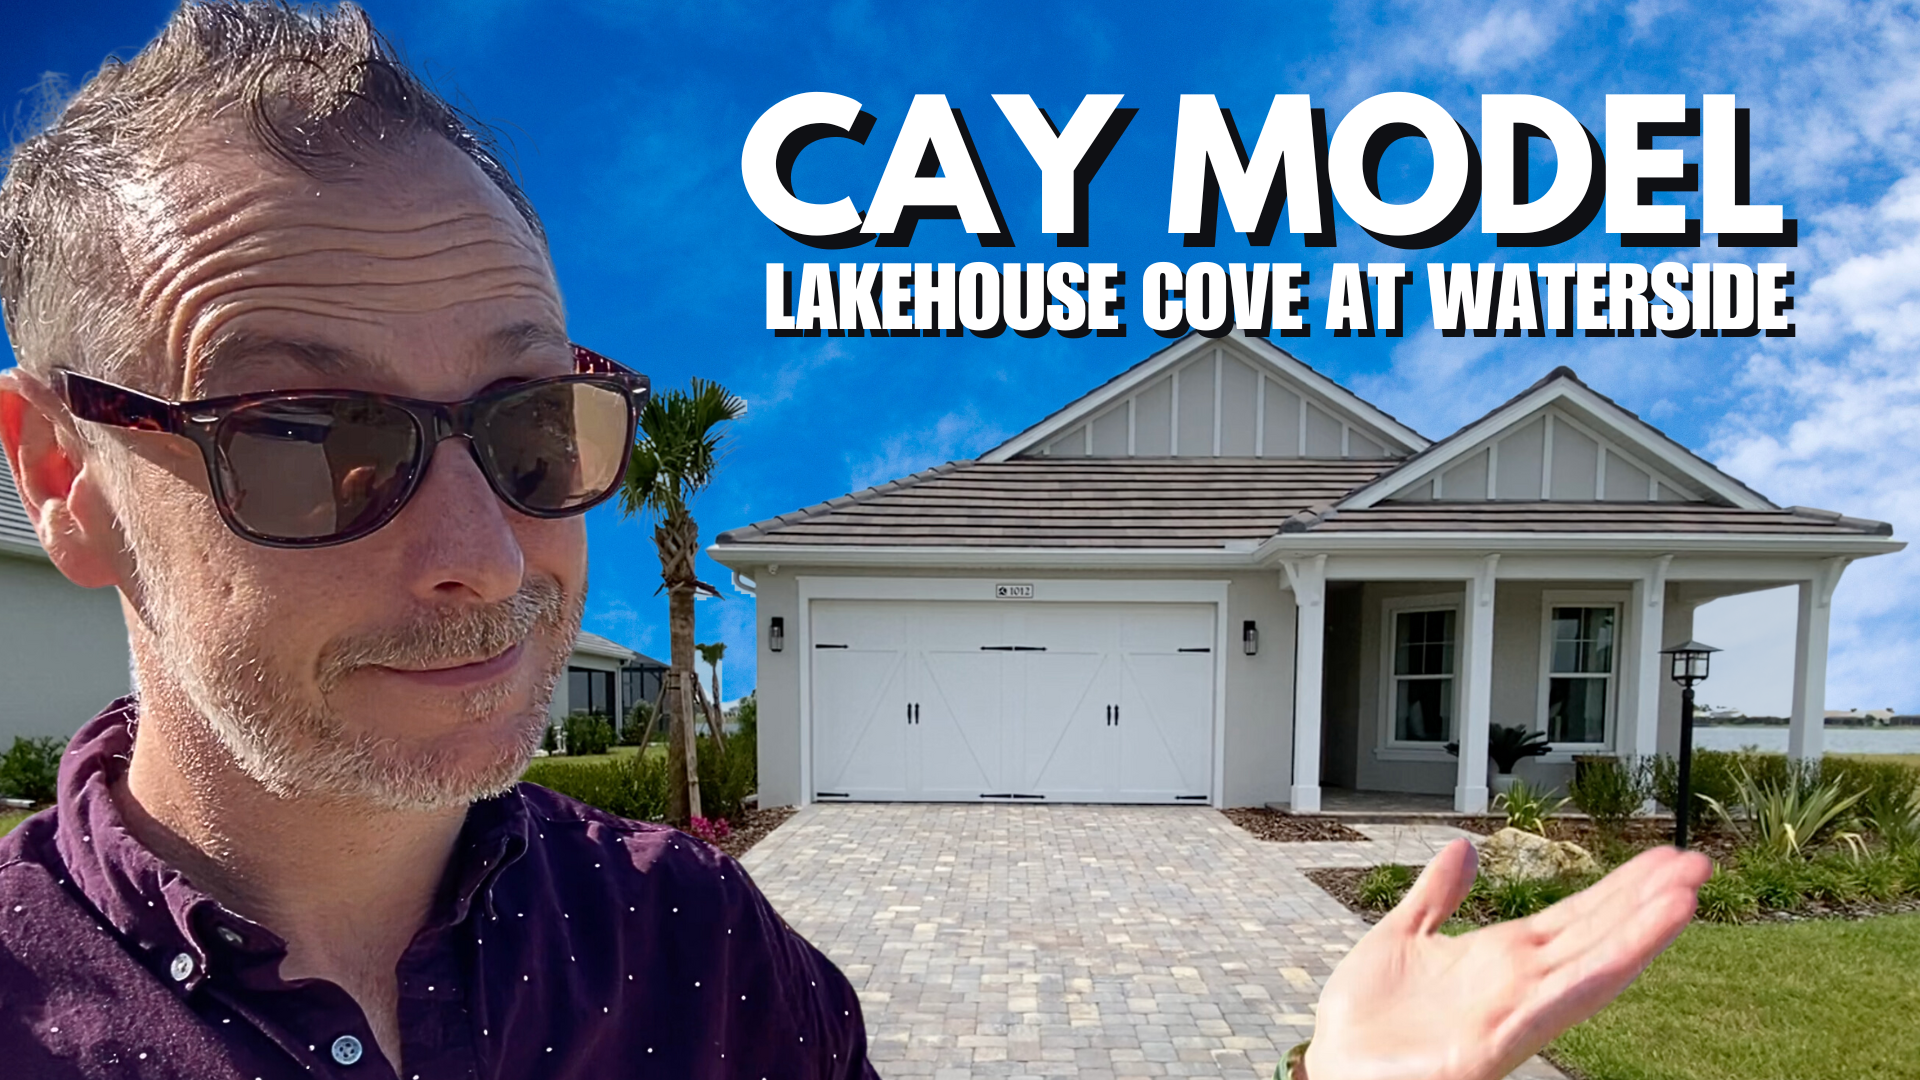 Cay Model Home Tour Lakehouse Cove at Waterside